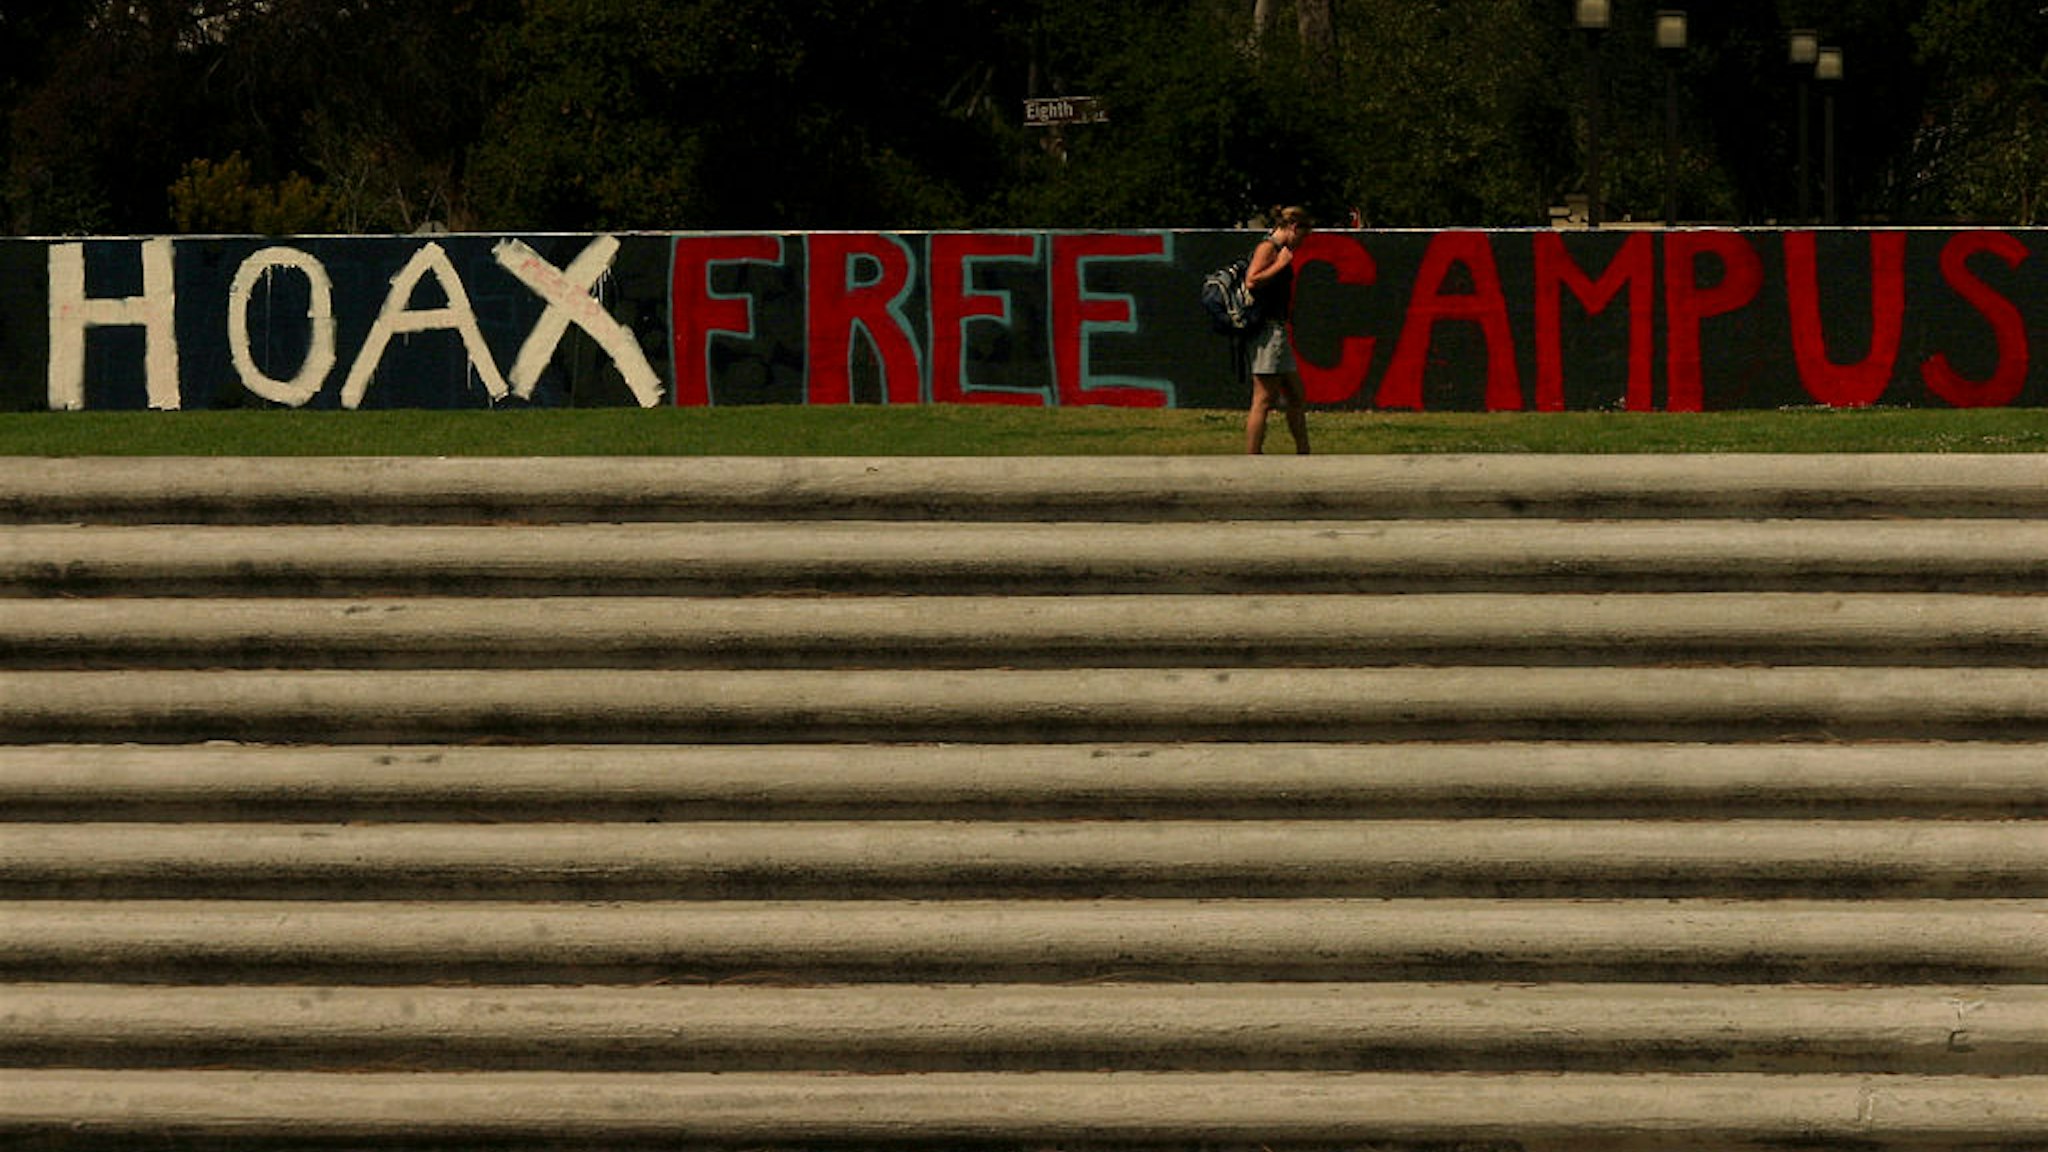 The word hoax was painted over the word hate in the phrase "we support hate free campuses" after news surfaced that Kerri Dunn, 39, a visiting assistant professor of psychology at Claremont McKenna College may have vandalized her own car in an attempt to put a spotlight on campus racism. She denies the allegation and has been placed on administrative leave. The wall, known as the Walker Wall, is used by students to express themselves on any subject.